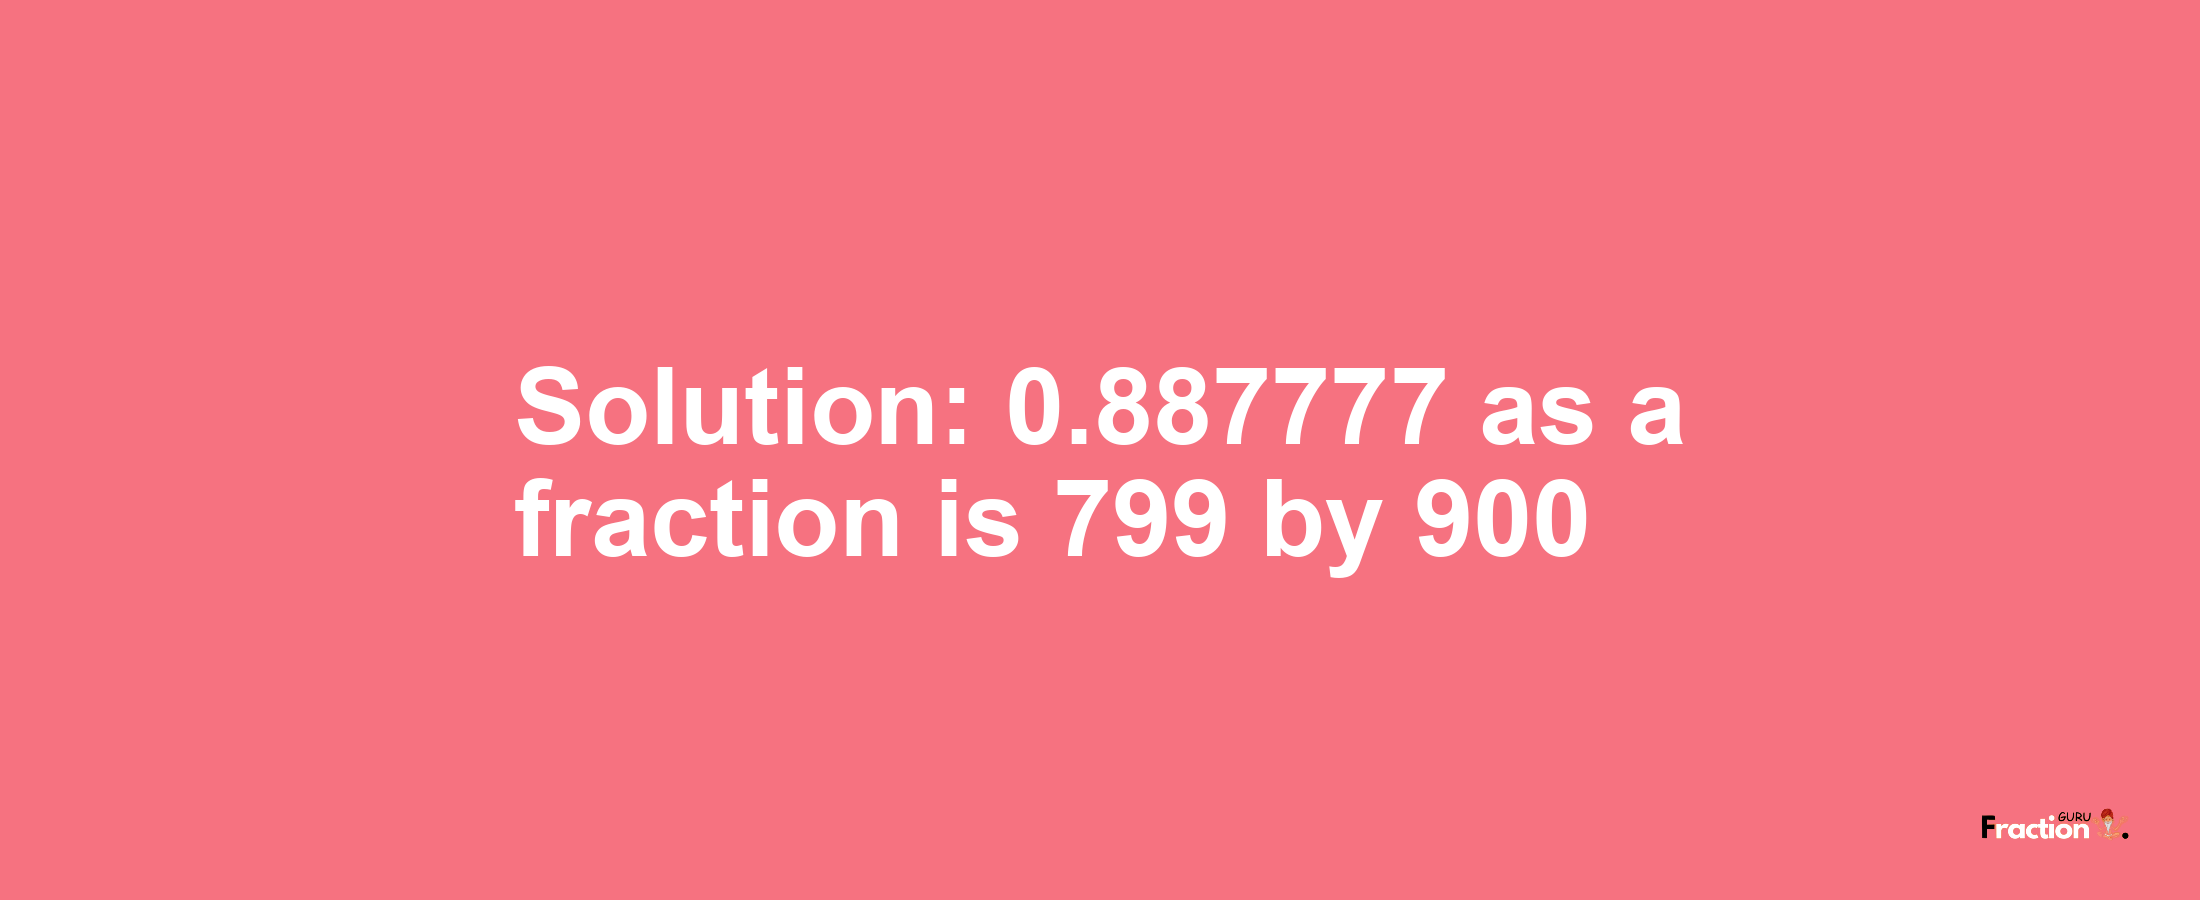 Solution:0.887777 as a fraction is 799/900